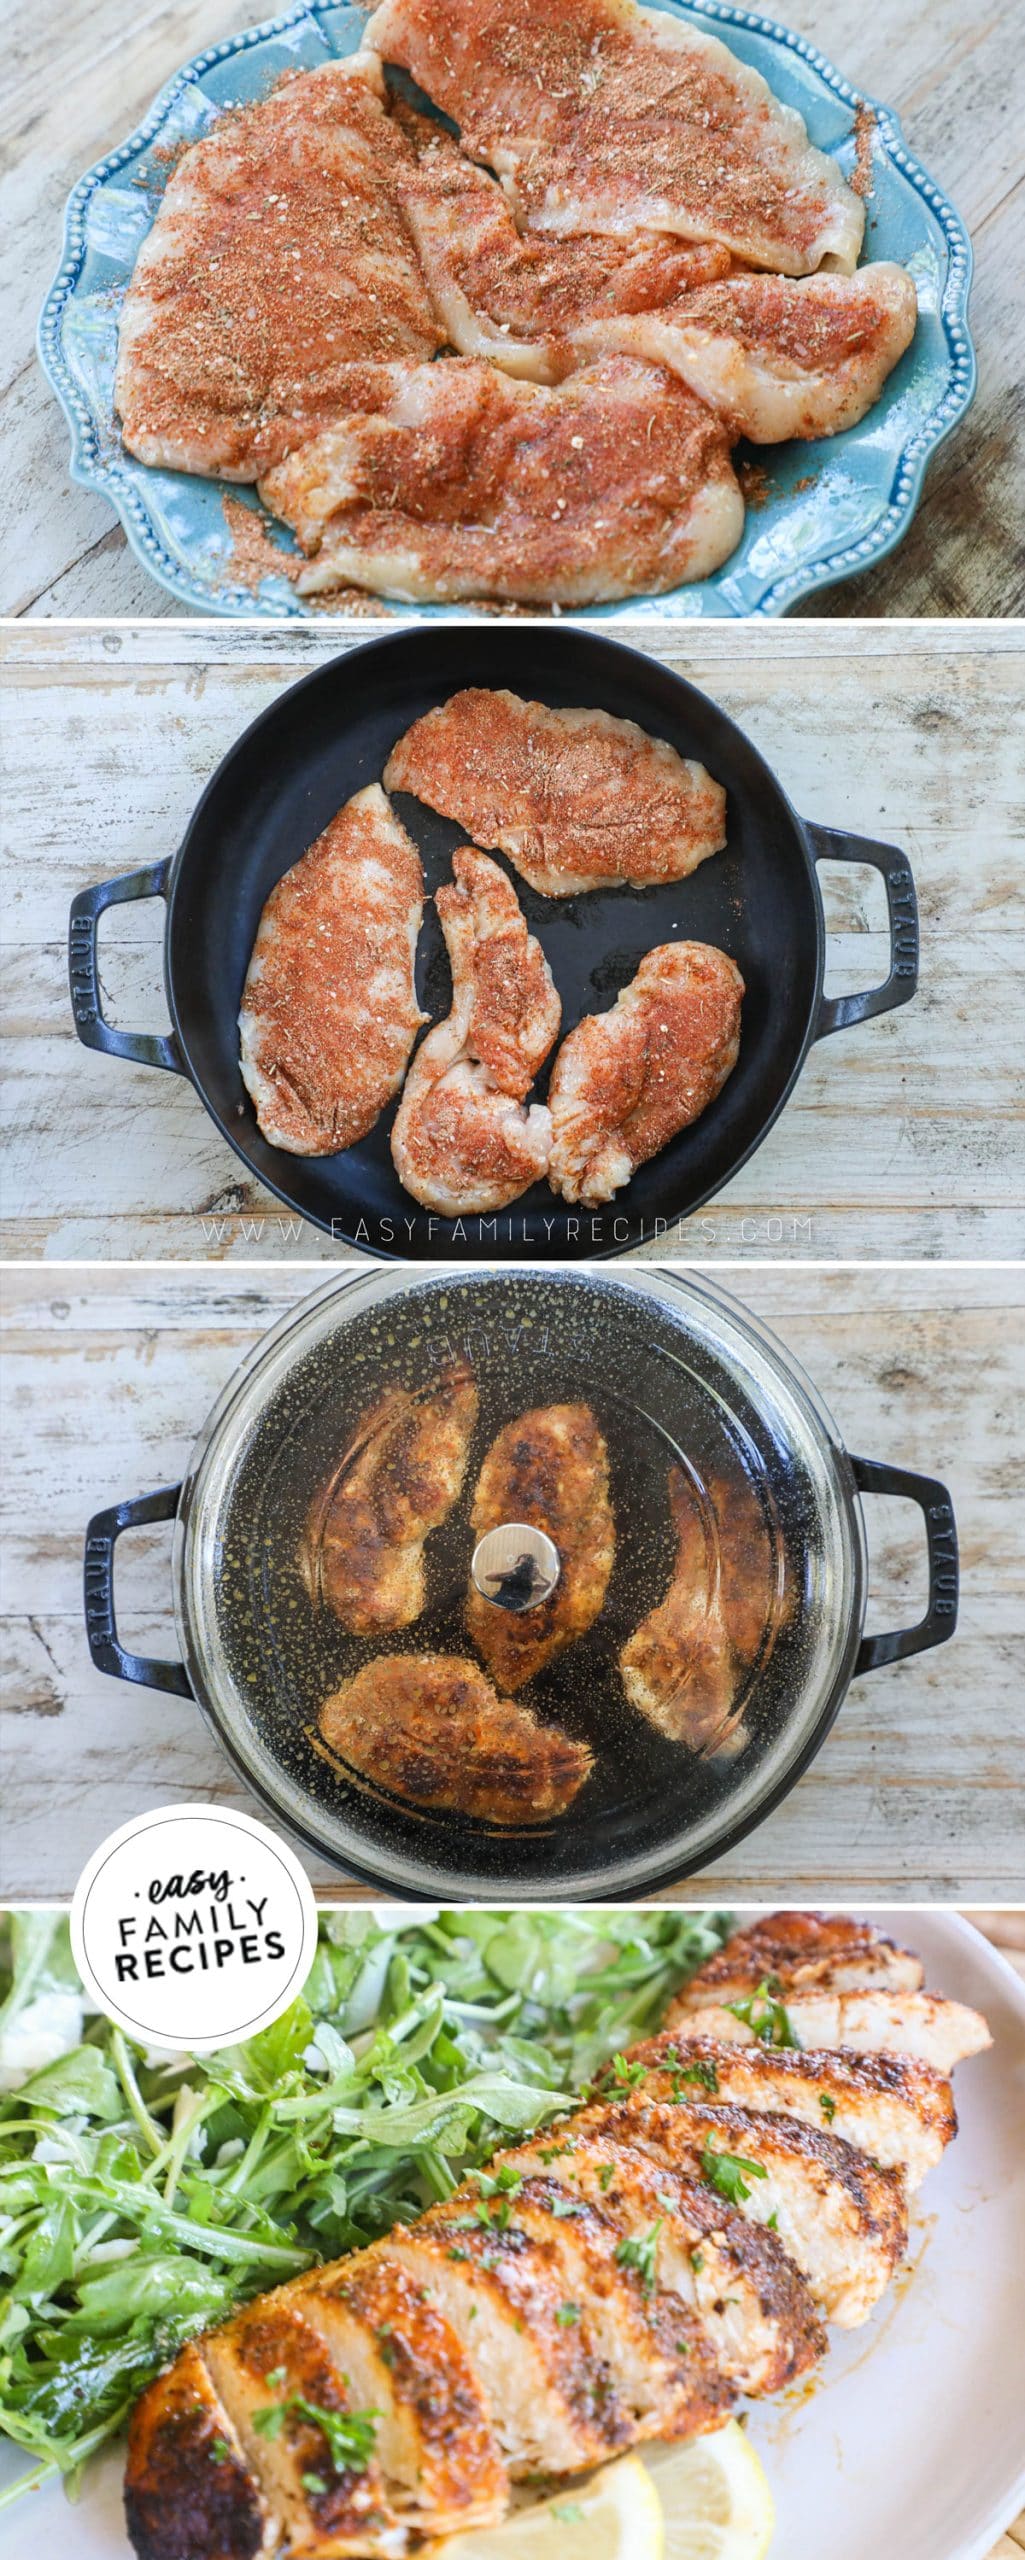 How to make Blackened Chicken Breast in a skillet - 1. Season Chicken. 2. Melt butter in skillet and add chicken. 3. Flip chicken breast and cover. 4. Rest chicken and serve.